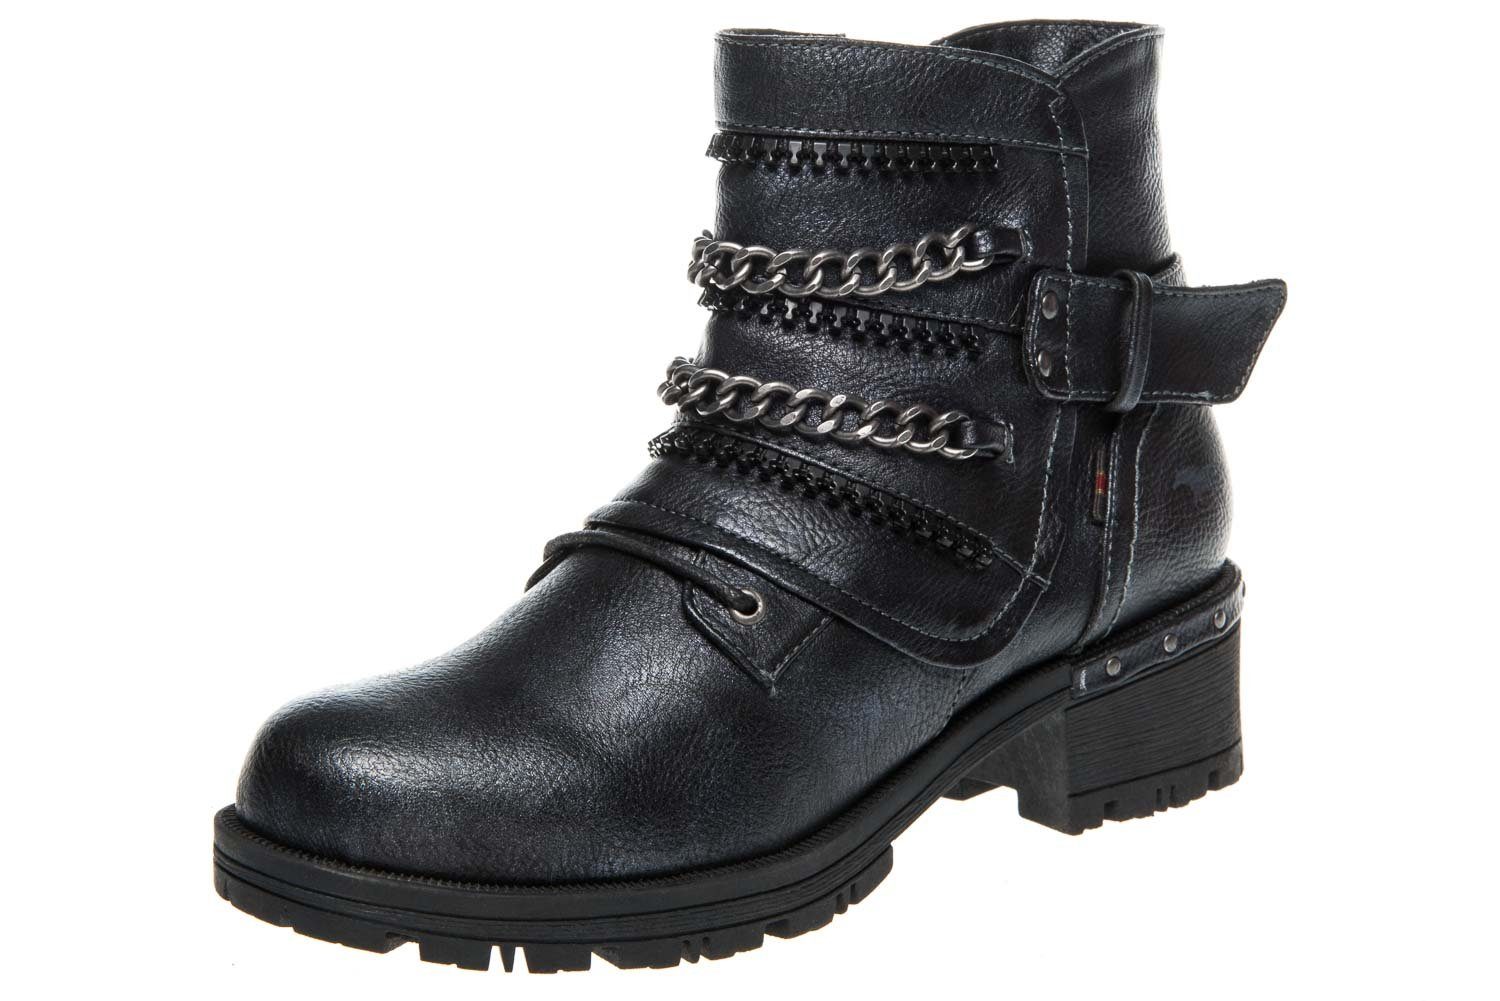 Shoes 1283-503-820 Schnürboots Mustang